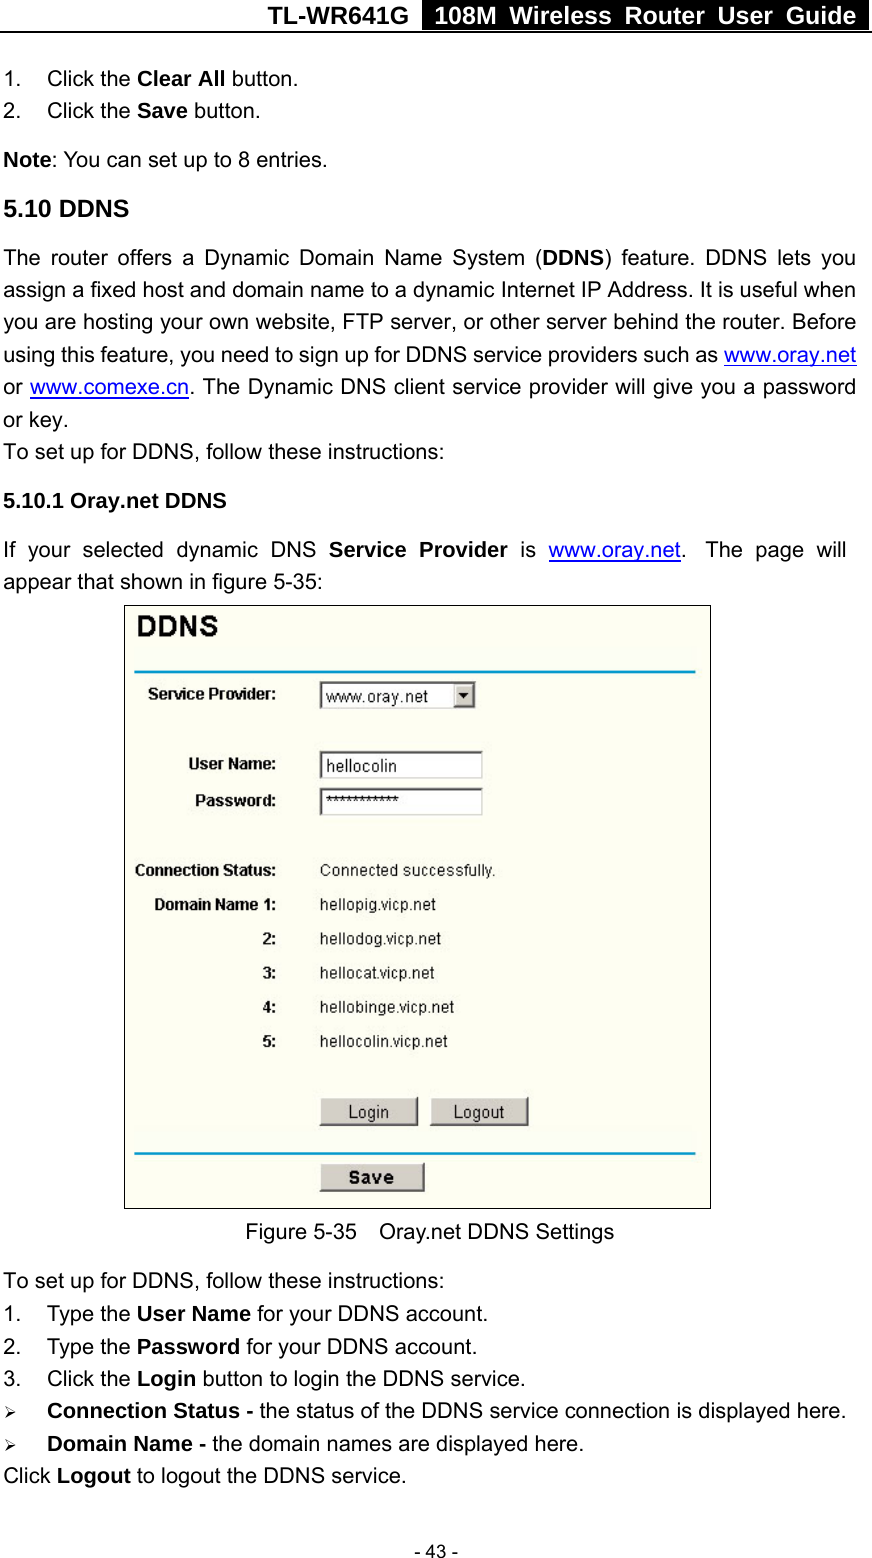 TL-WR641G   108M Wireless Router User Guide   - 43 -1. Click the Clear All button. 2. Click the Save button. Note: You can set up to 8 entries. 5.10 DDNS The router offers a Dynamic Domain Name System (DDNS) feature. DDNS lets you assign a fixed host and domain name to a dynamic Internet IP Address. It is useful when you are hosting your own website, FTP server, or other server behind the router. Before using this feature, you need to sign up for DDNS service providers such as www.oray.net or www.comexe.cn. The Dynamic DNS client service provider will give you a password or key. To set up for DDNS, follow these instructions: 5.10.1 Oray.net DDNS If your selected dynamic DNS Service Provider is  www.oray.net.  The page will appear that shown in figure 5-35:   Figure 5-35    Oray.net DDNS Settings To set up for DDNS, follow these instructions: 1. Type the User Name for your DDNS account.   2. Type the Password for your DDNS account.   3. Click the Login button to login the DDNS service.   ¾ Connection Status - the status of the DDNS service connection is displayed here. ¾ Domain Name - the domain names are displayed here. Click Logout to logout the DDNS service. 